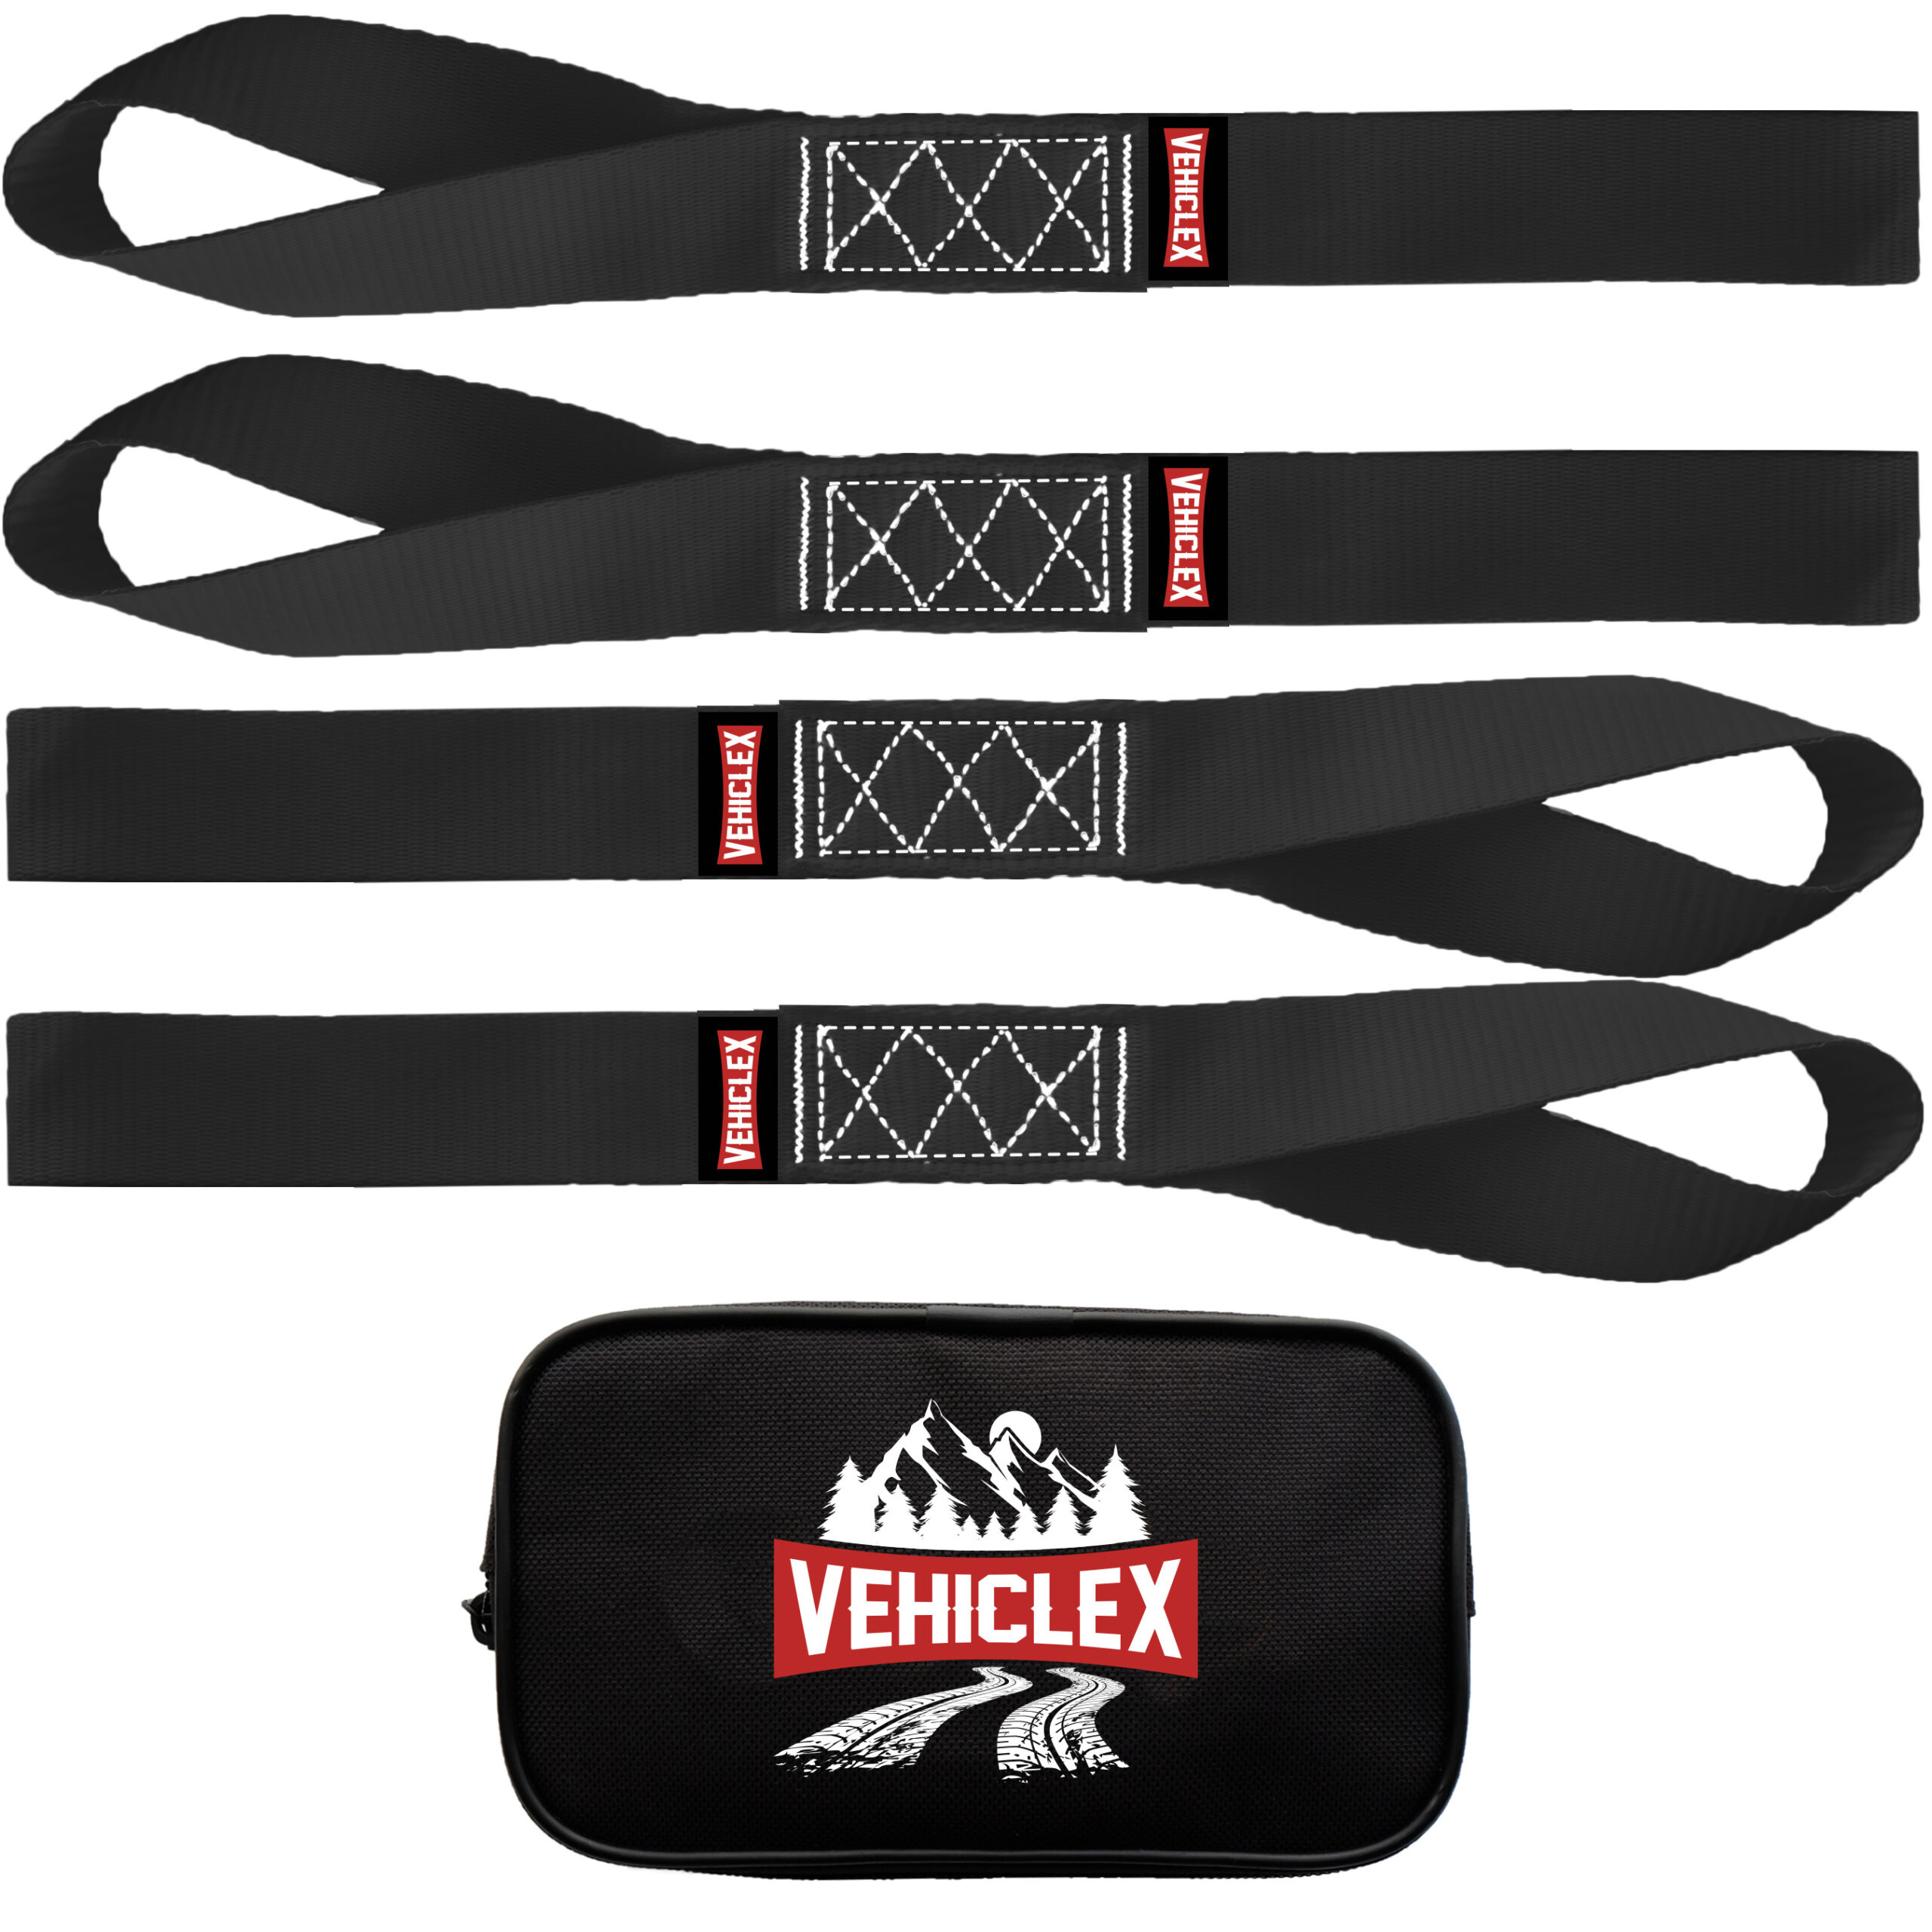 Quads Pack of 5 18-inch Forearm Forklift FFLH185 LoopHolz Soft Loop Straps for Motorcycles Generators and Other Equipment for Lengthening Tie-Downs and Bungee Cords Black UTVs 